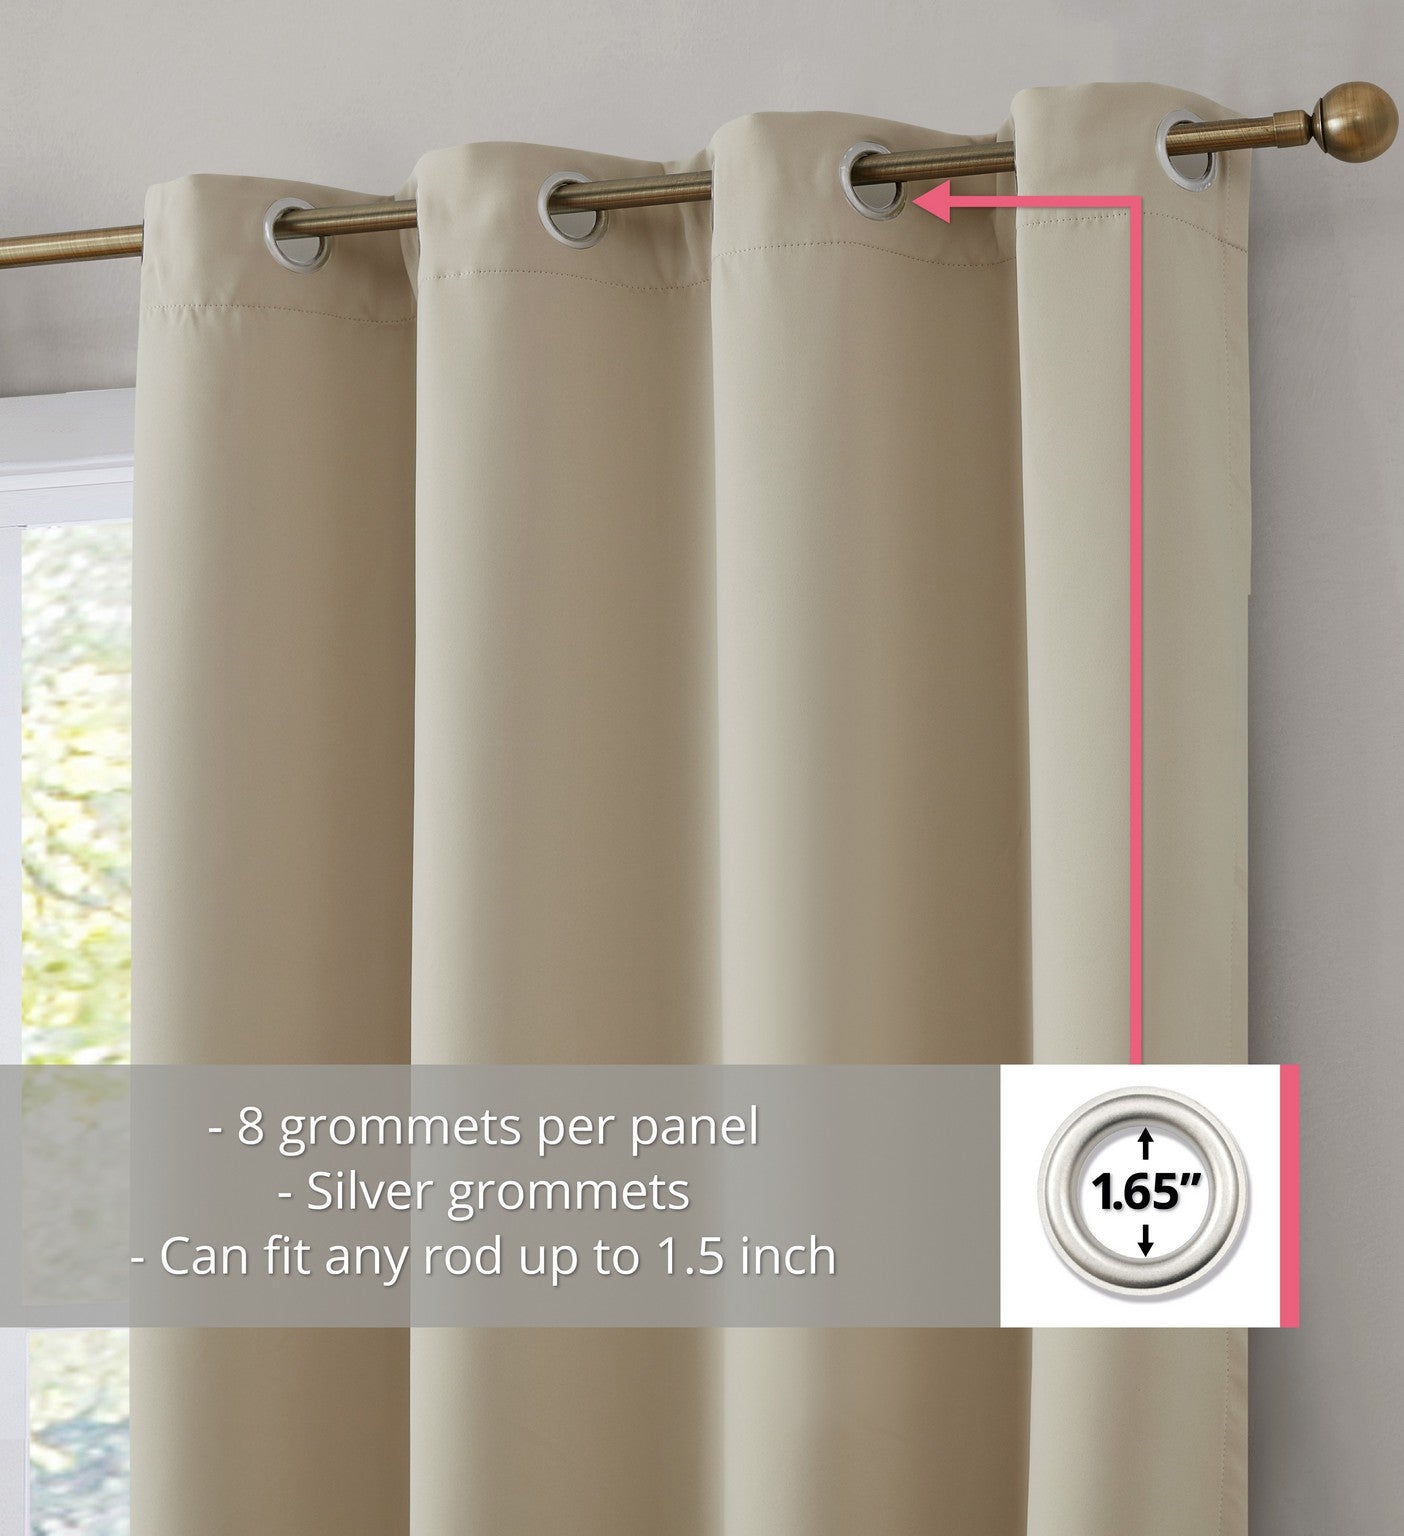 100% Blackout Curtains with Insulight Membrane